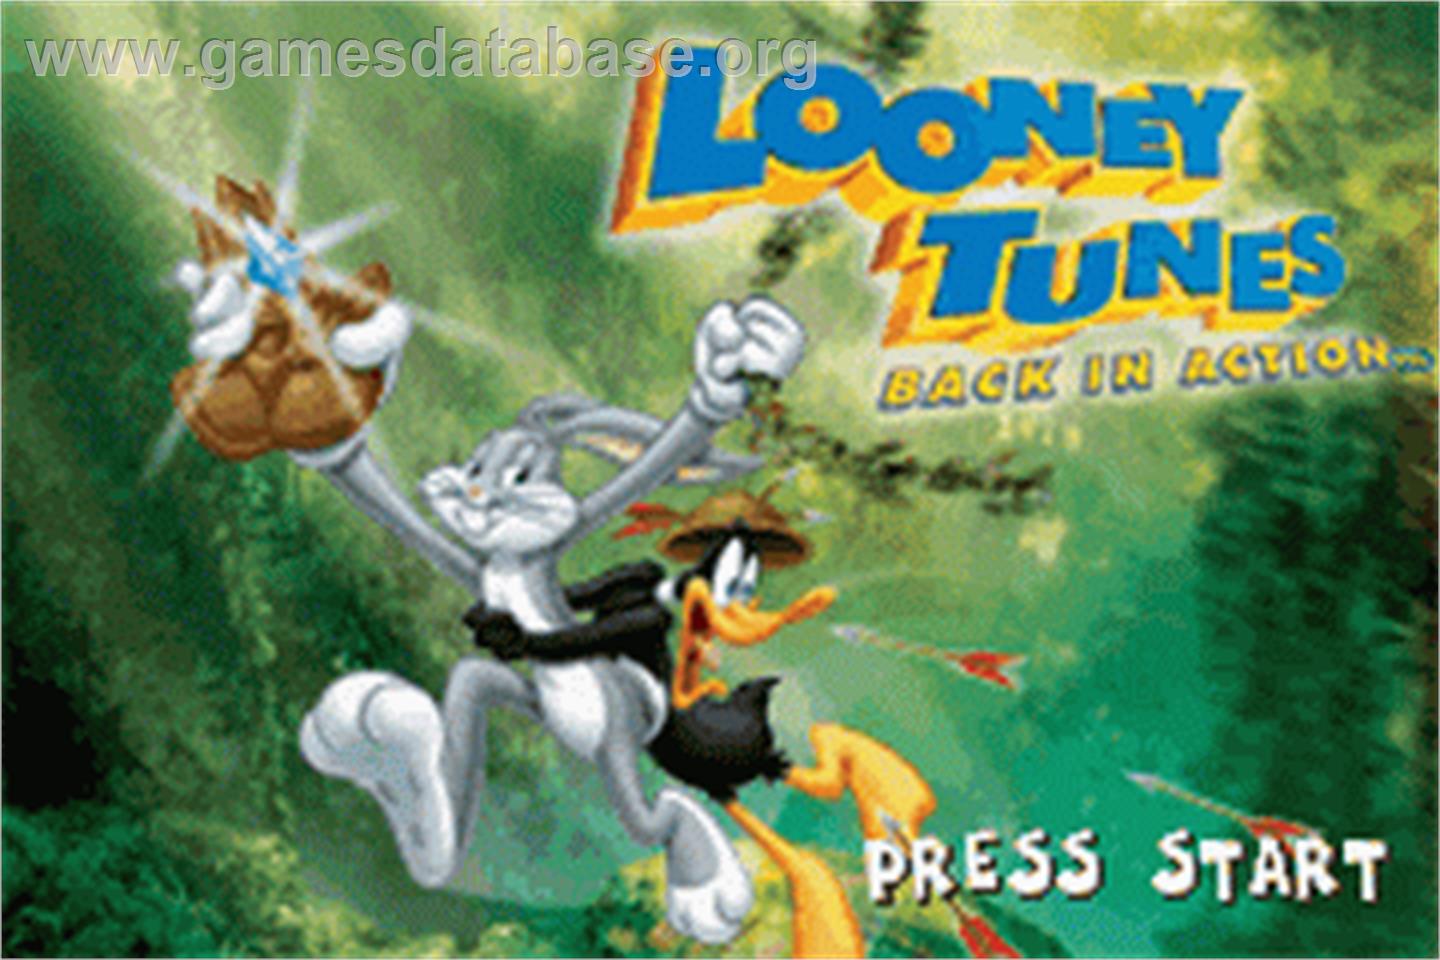 Looney Tunes Back in Action - Nintendo Game Boy Advance - Artwork - Title Screen